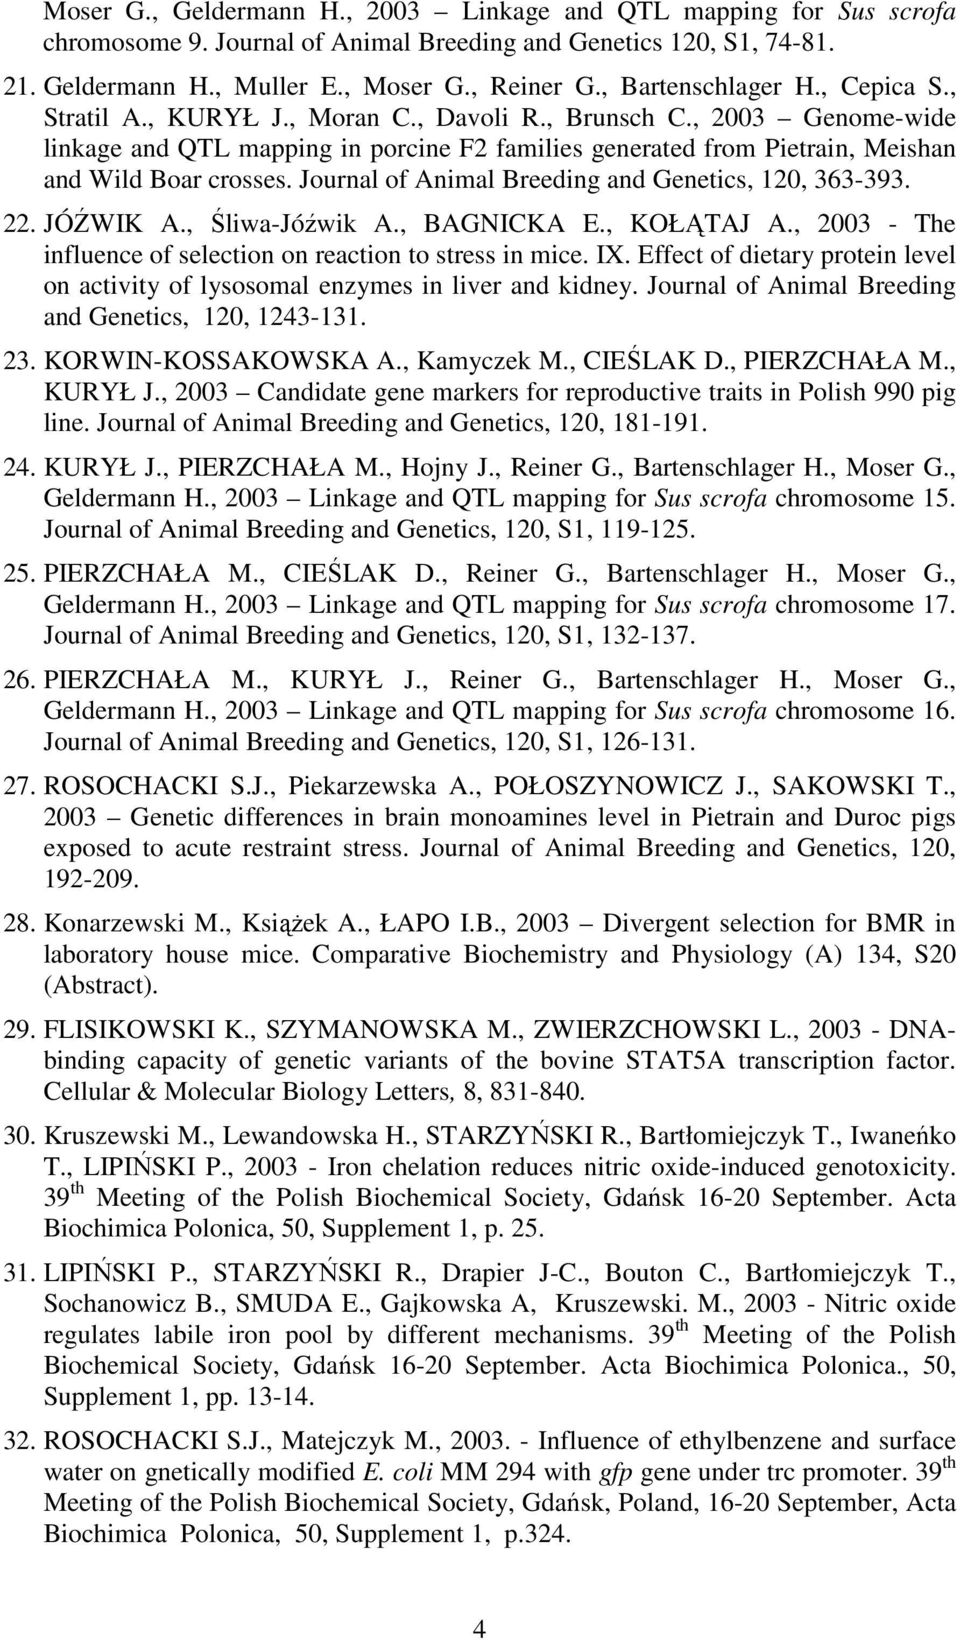 , 2003 Genome-wide linkage and QTL mapping in porcine F2 families generated from Pietrain, Meishan and Wild Boar crosses. Journal of Animal Breeding and Genetics, 120, 363-393. 22. JÓŹWIK A.